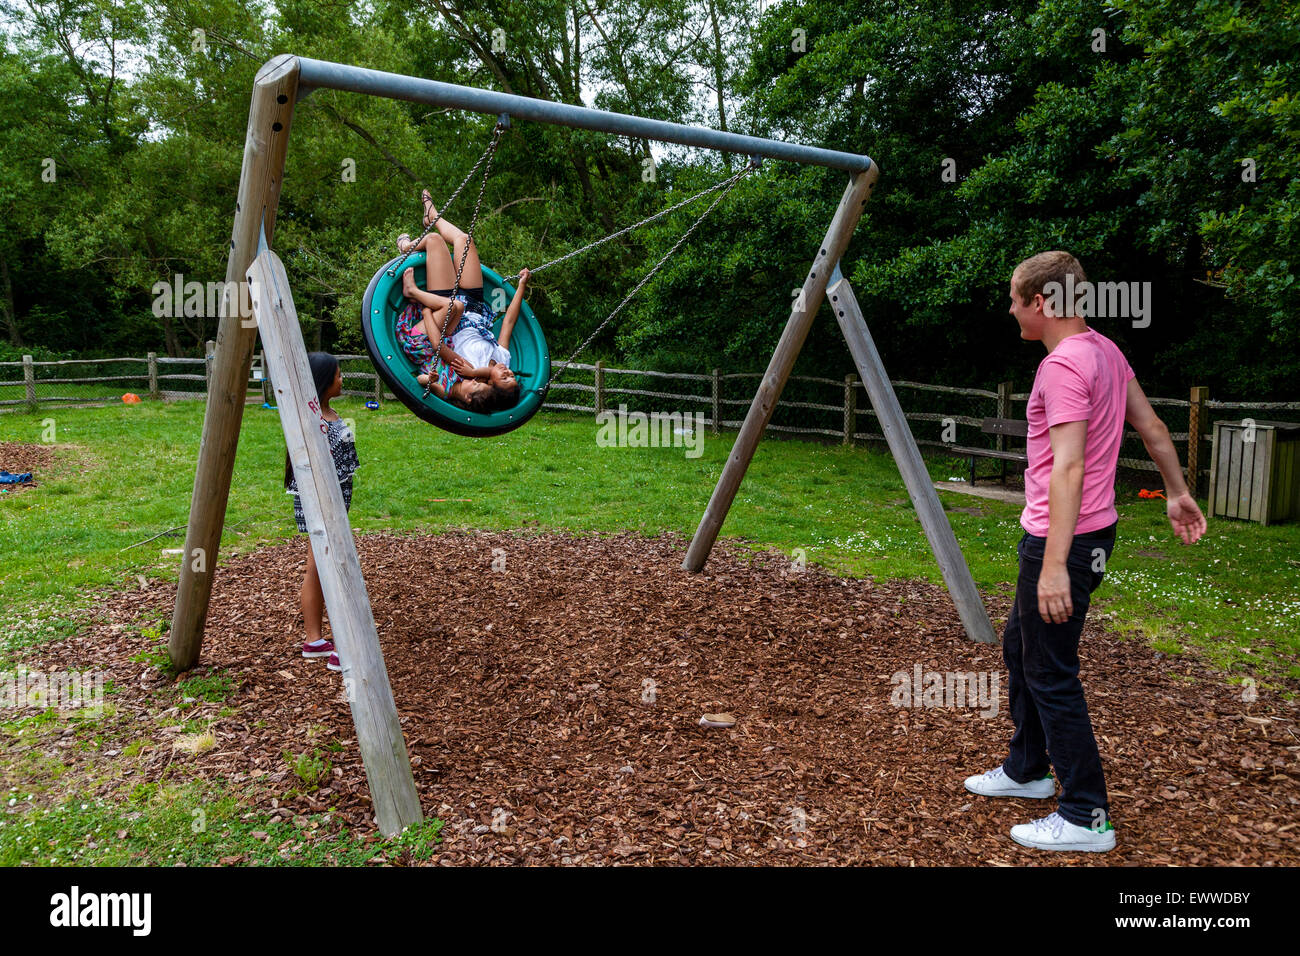 A Family Playing On The Swings, Play Area, Sussex, UK Stock Photo